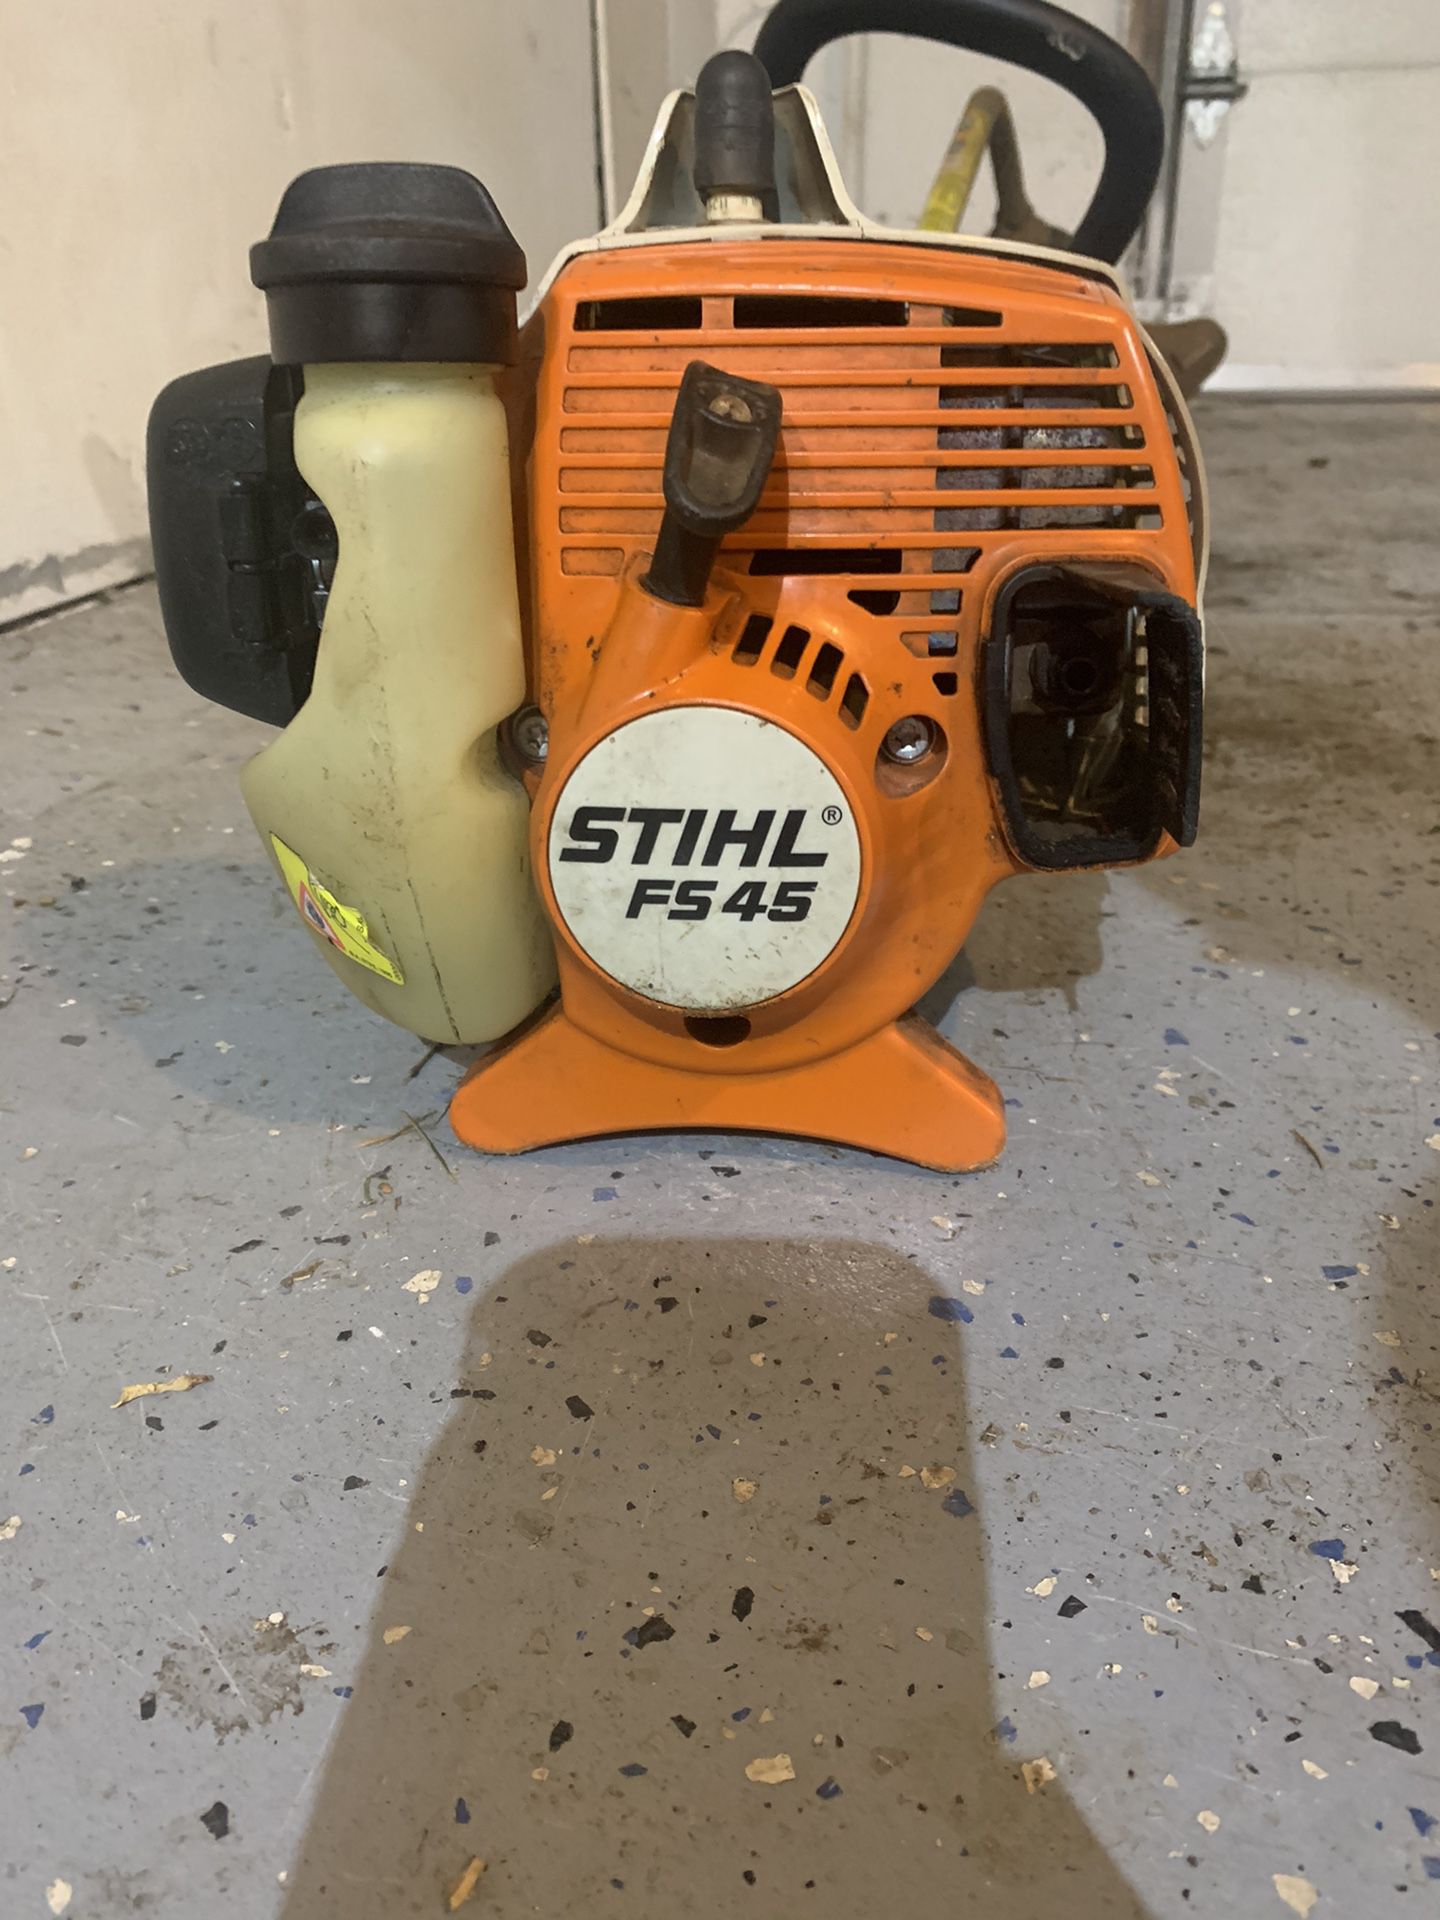 Cambiarse de ropa Producto Pantera Stihl FS 45 Weed eater; For Parts for Sale in Edmonds, WA - OfferUp